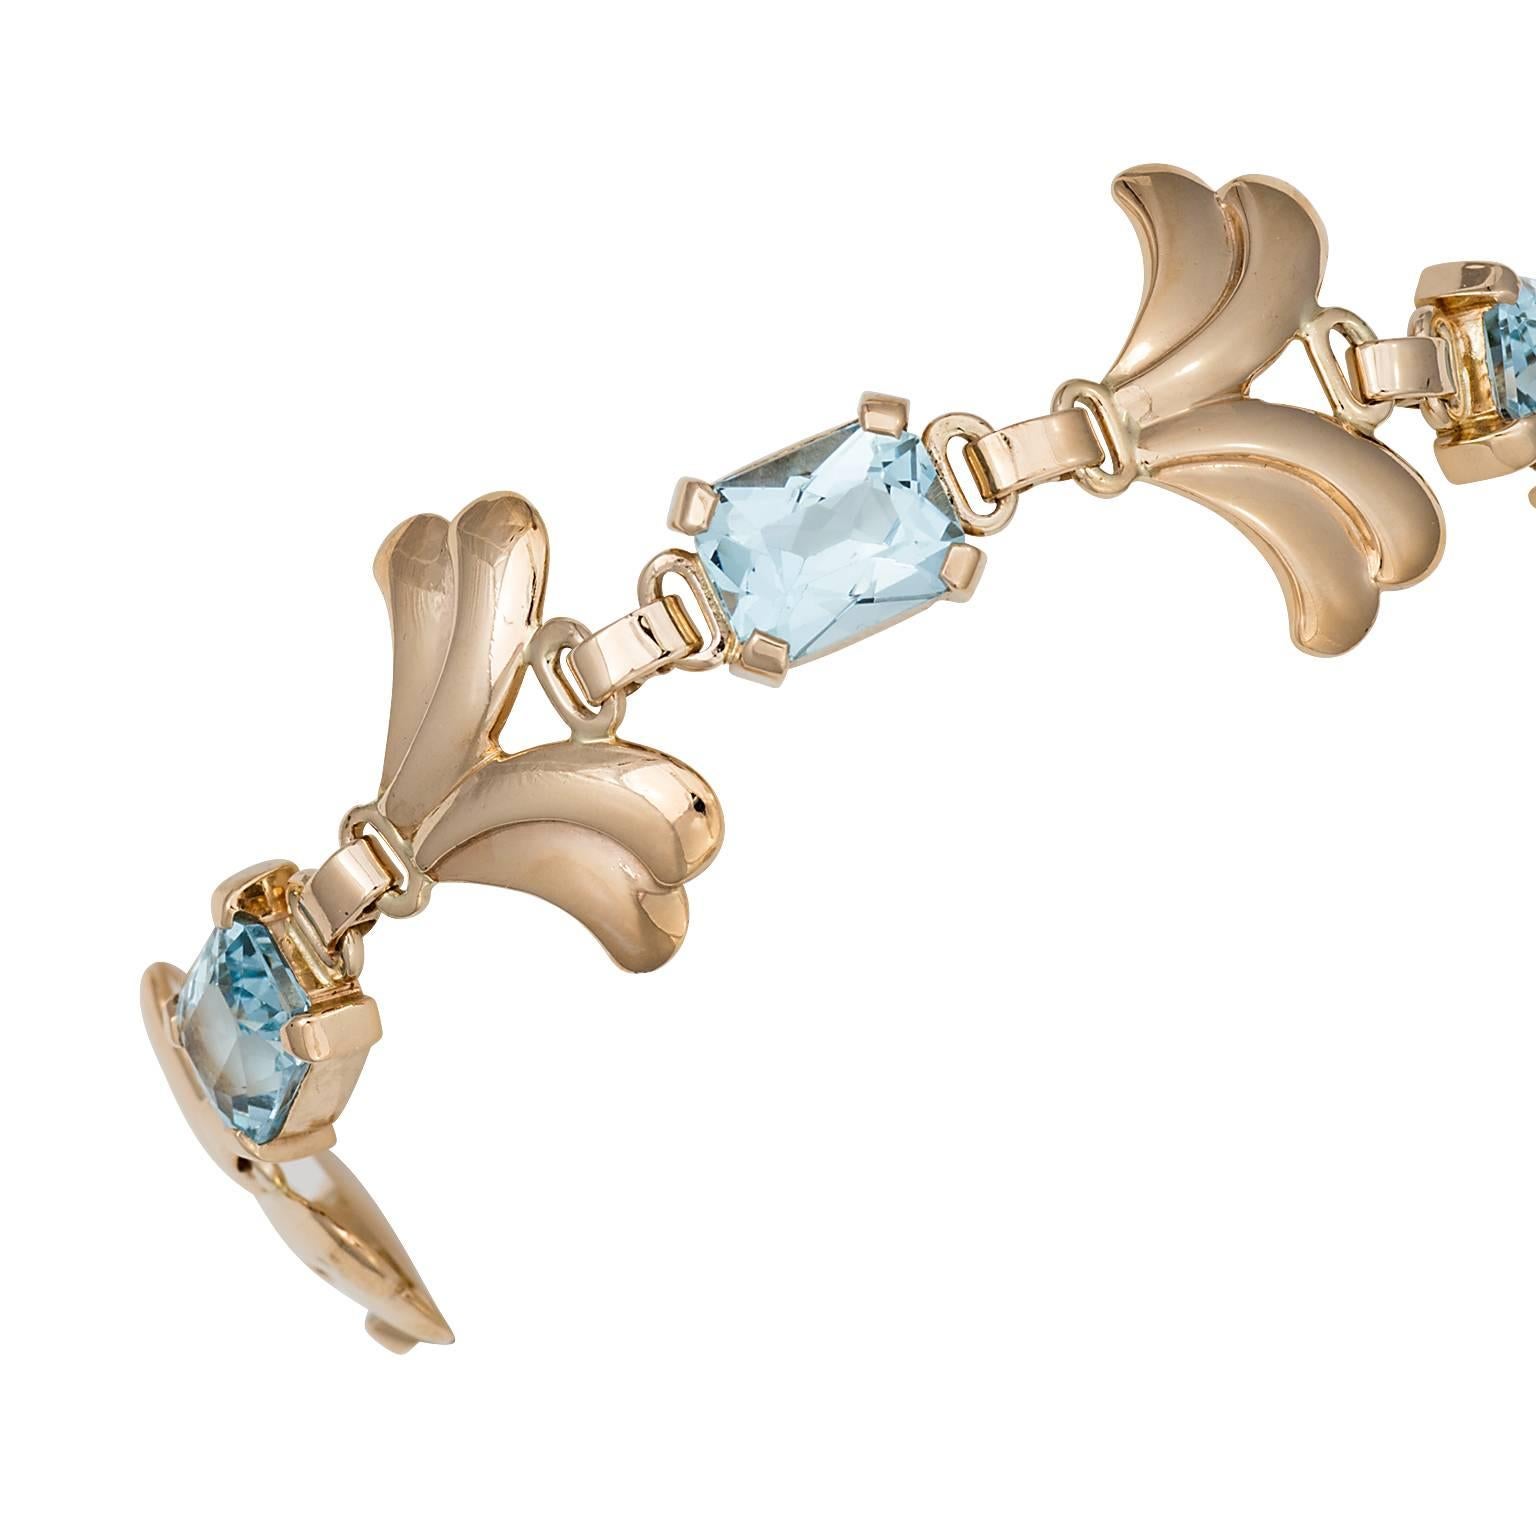 Tiffany & Co. retro style aquamarine bracelet in 14k rose gold.  The bracelet has four rectangular aquamarines weighing 7.20cts total, prong set between wing shaped links.

Length:  7.35 inches
Signed:  Tiffany & Co
Hallmark:  14K 